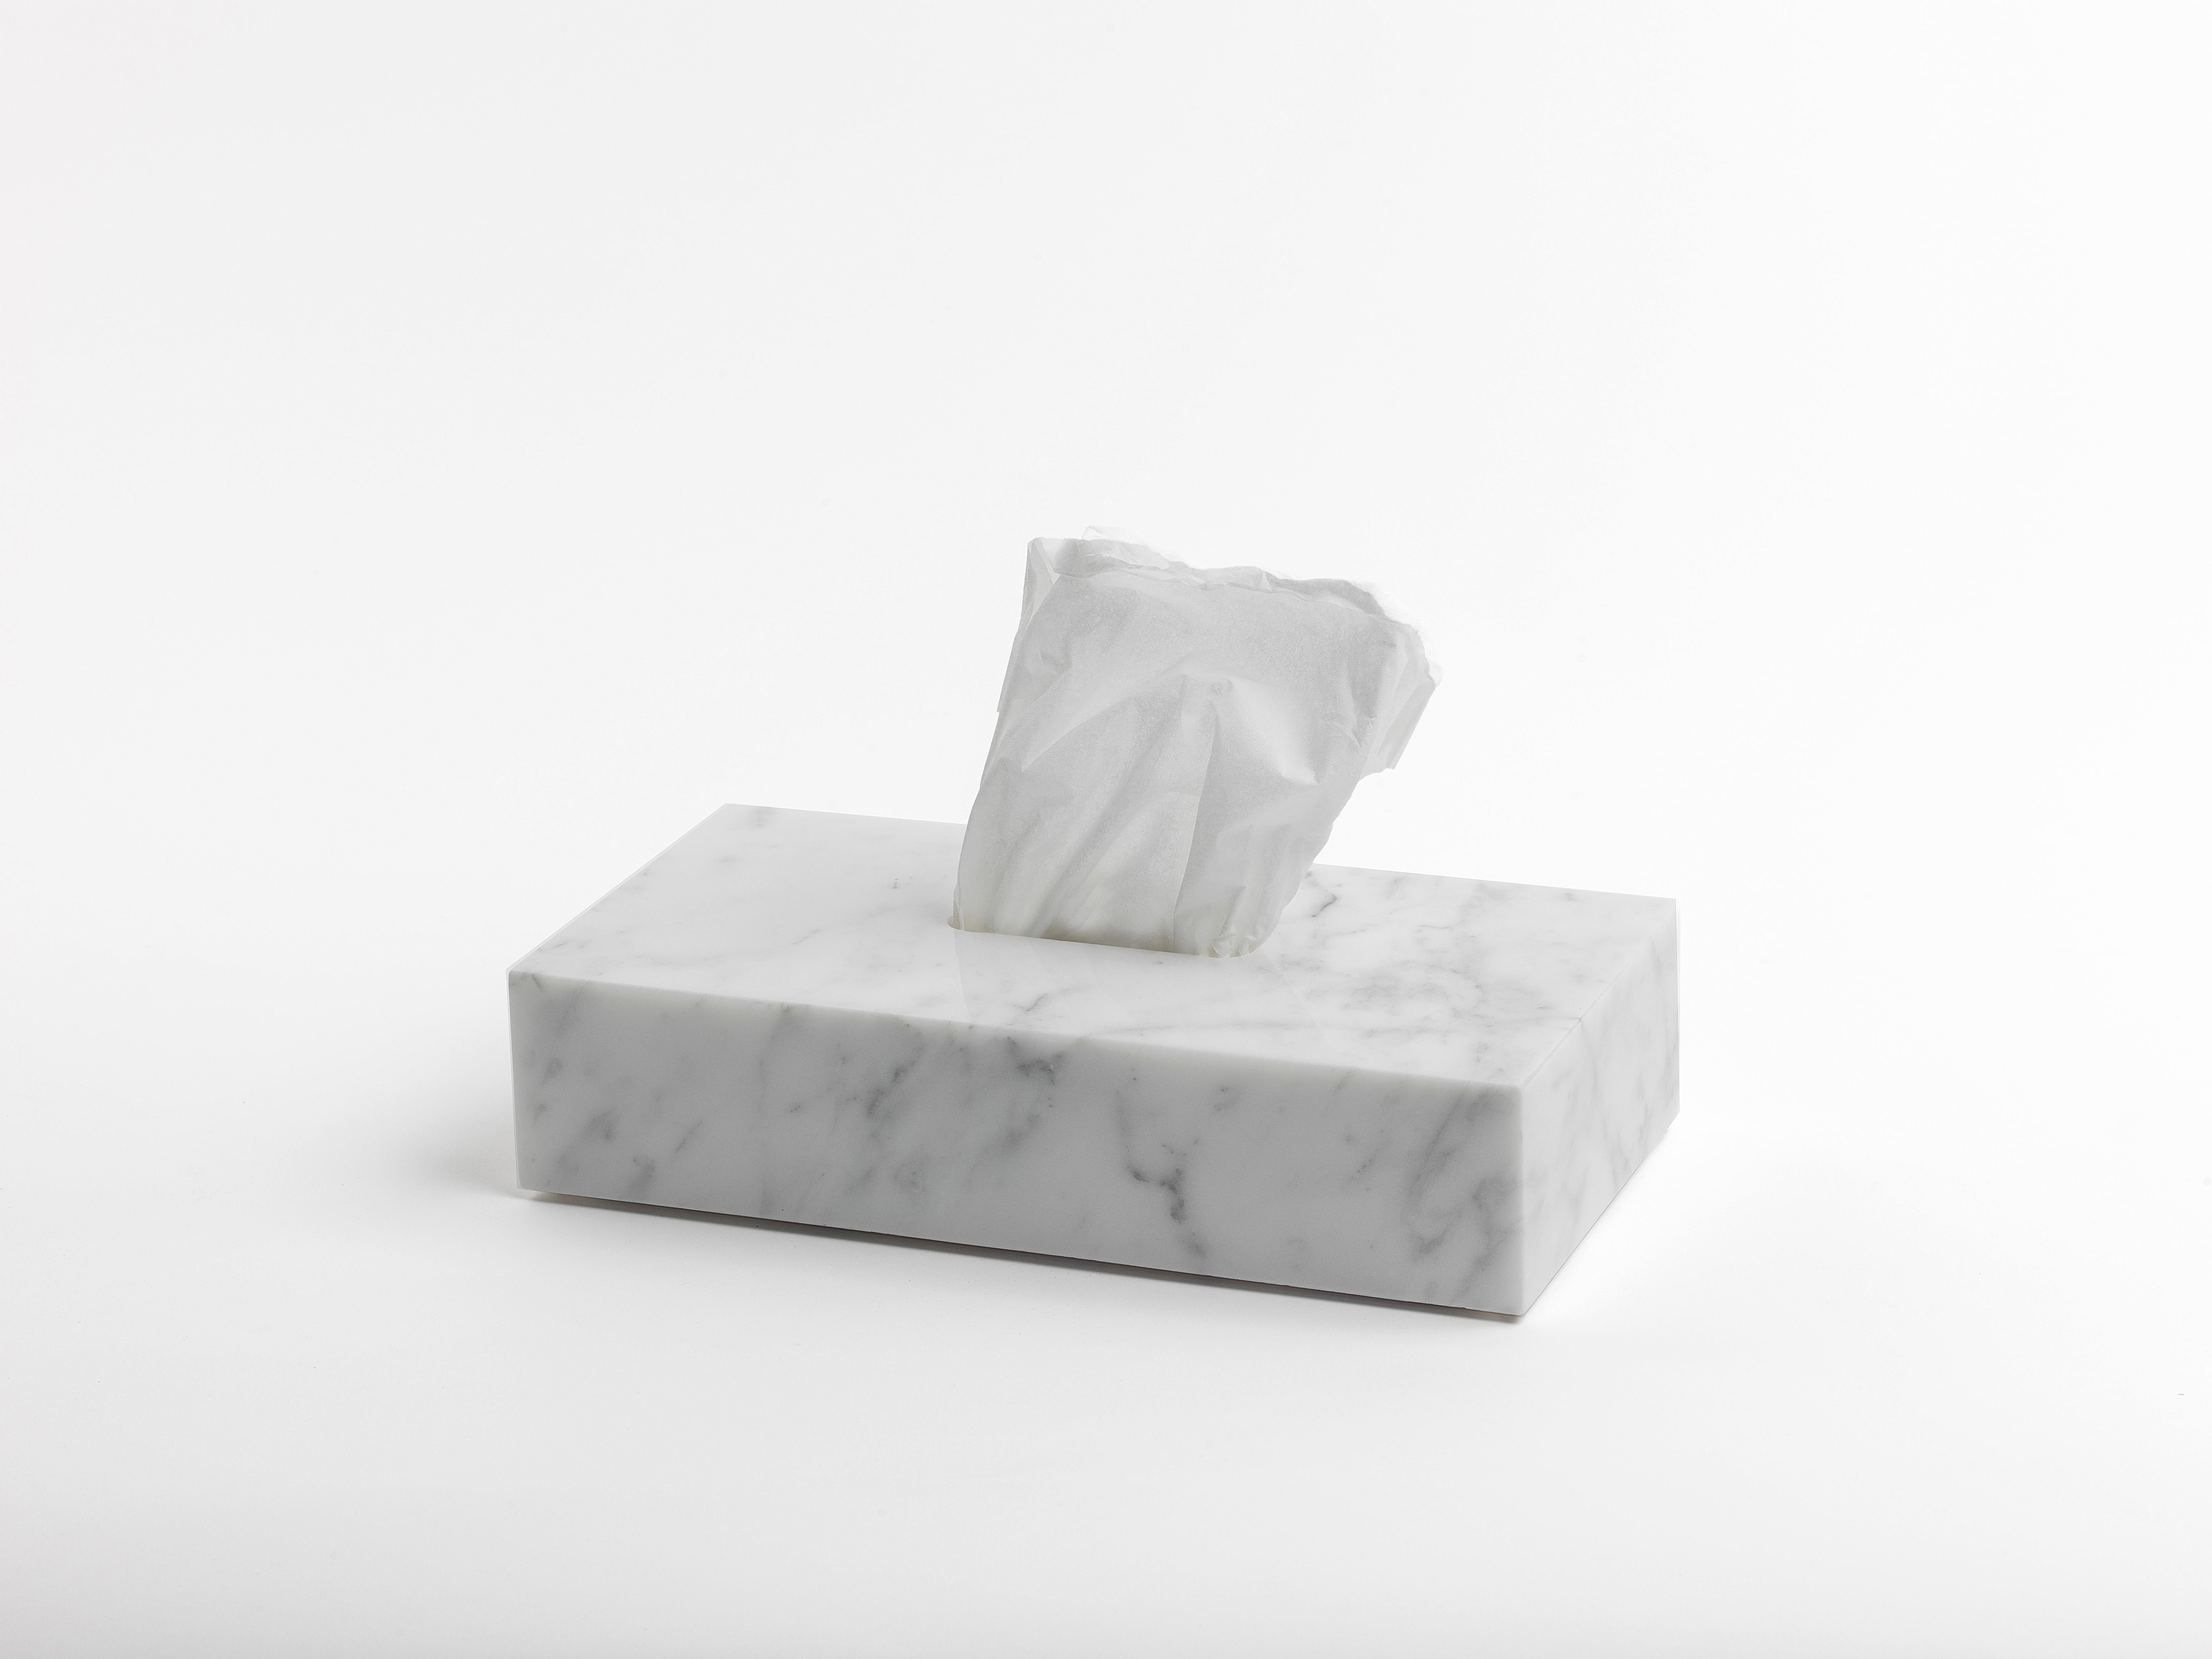 Squared Tissues Cover Box in Marble 1